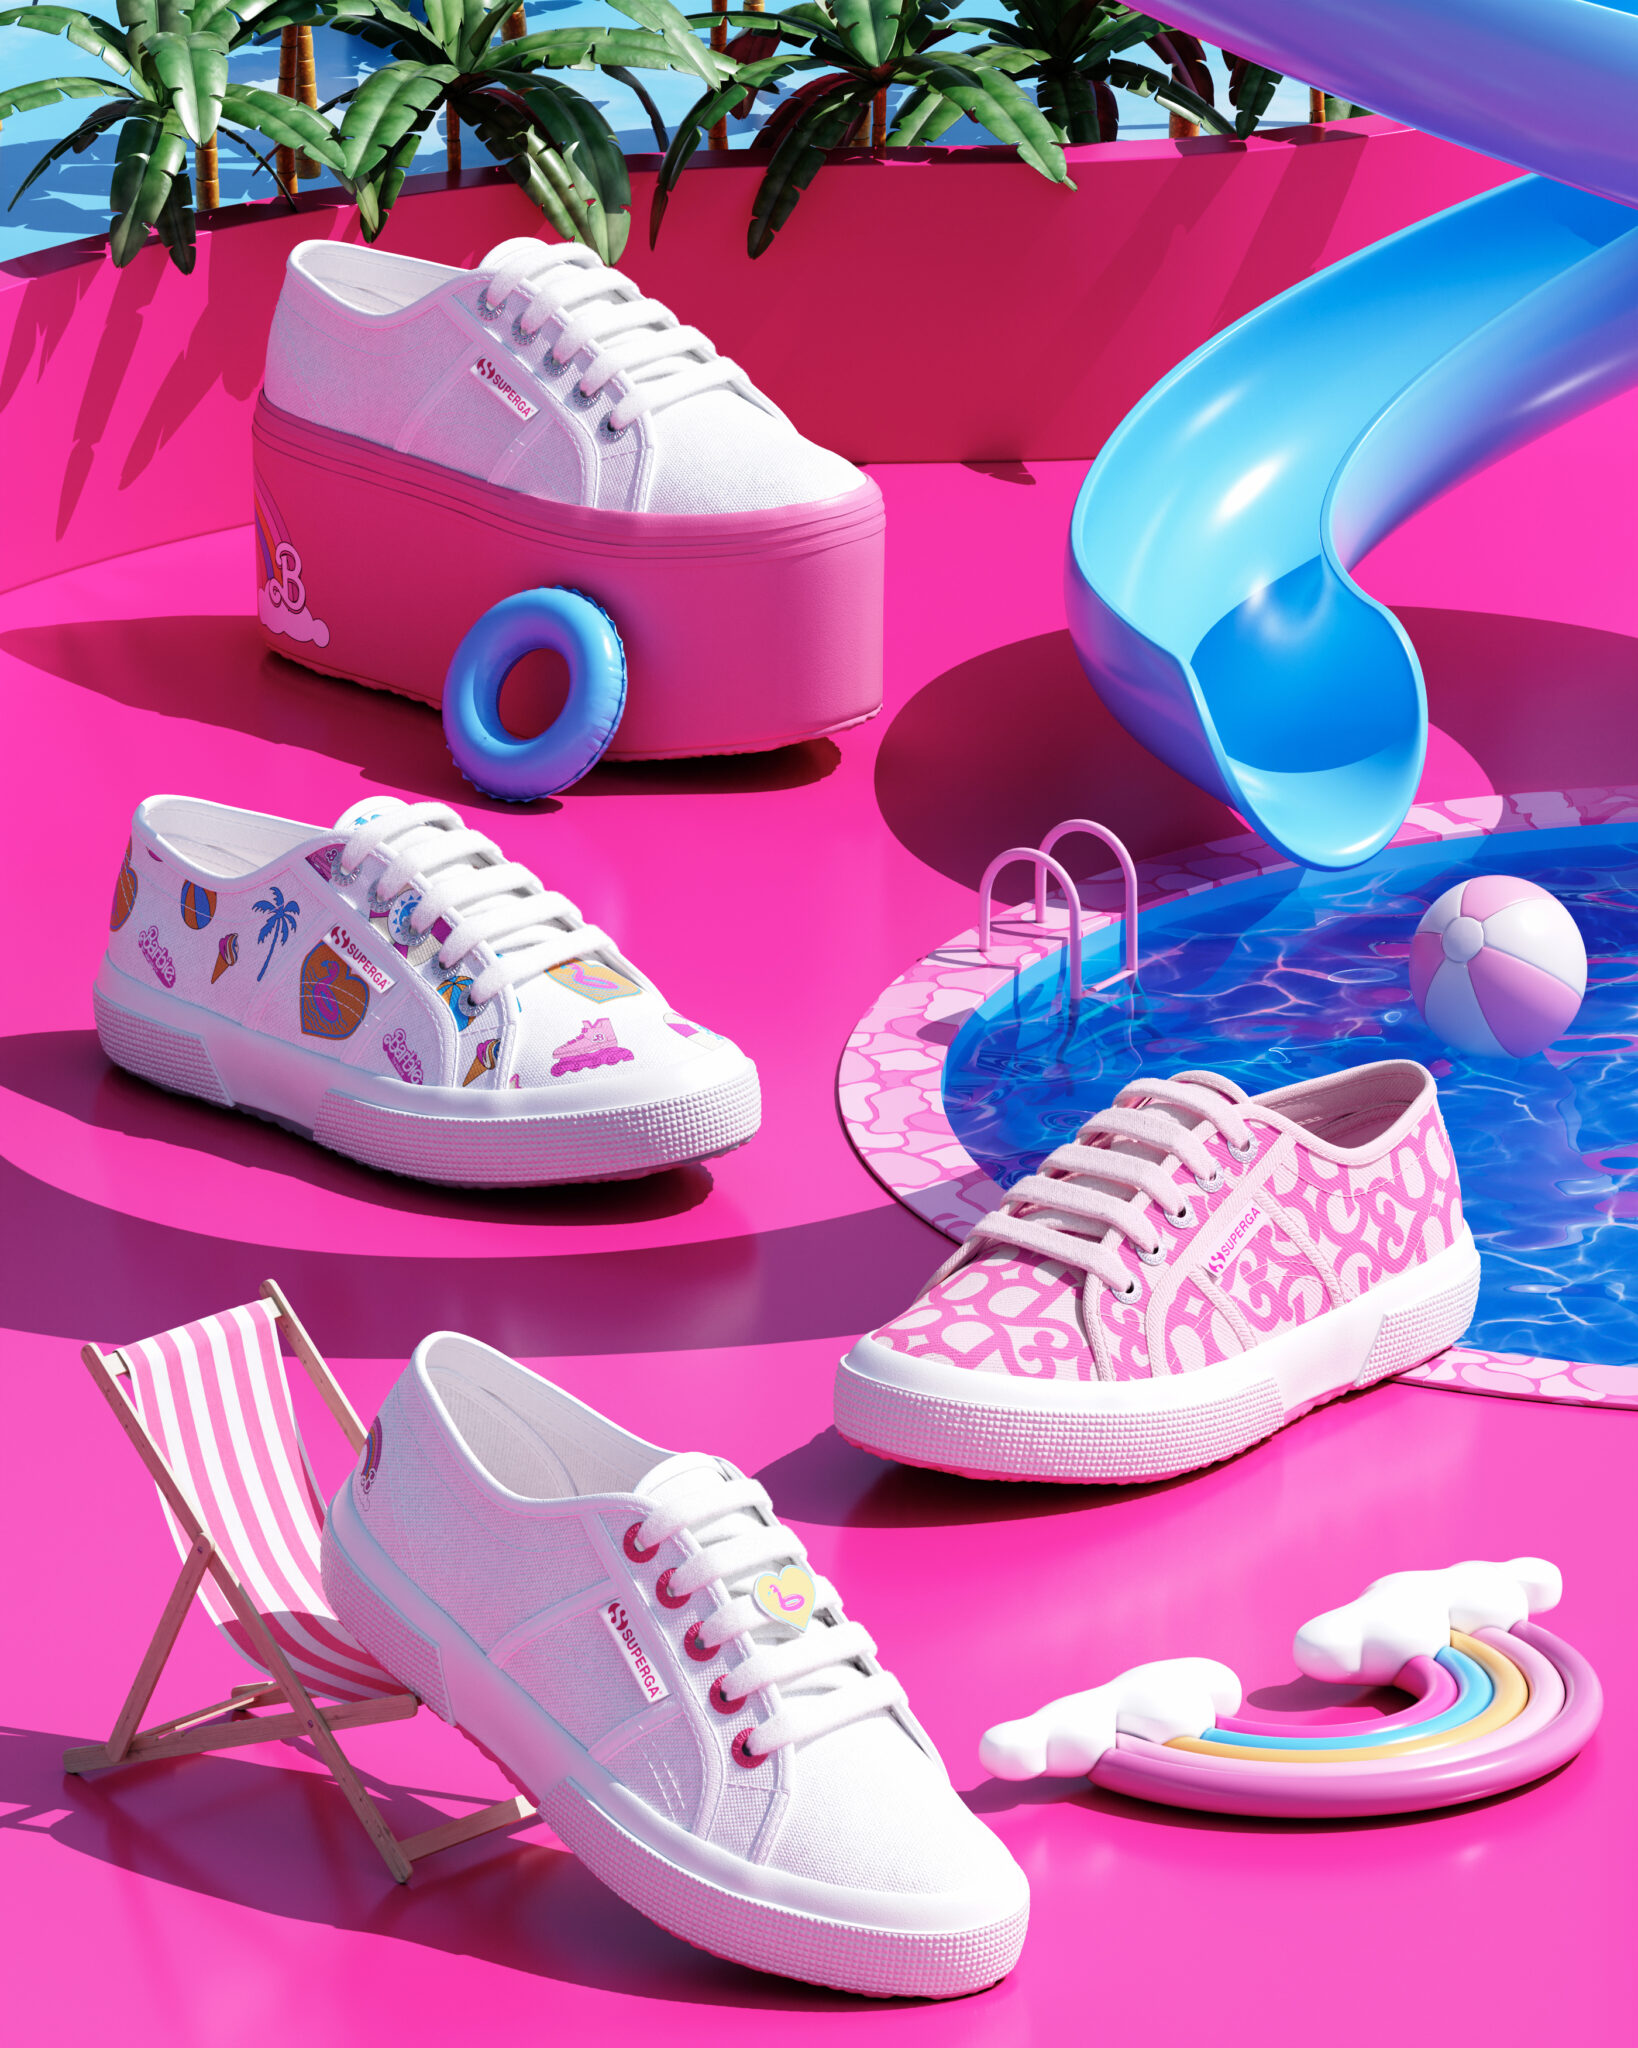 Superga Teams Up With Barbie For An Exclusive Capsule Collection - V ...